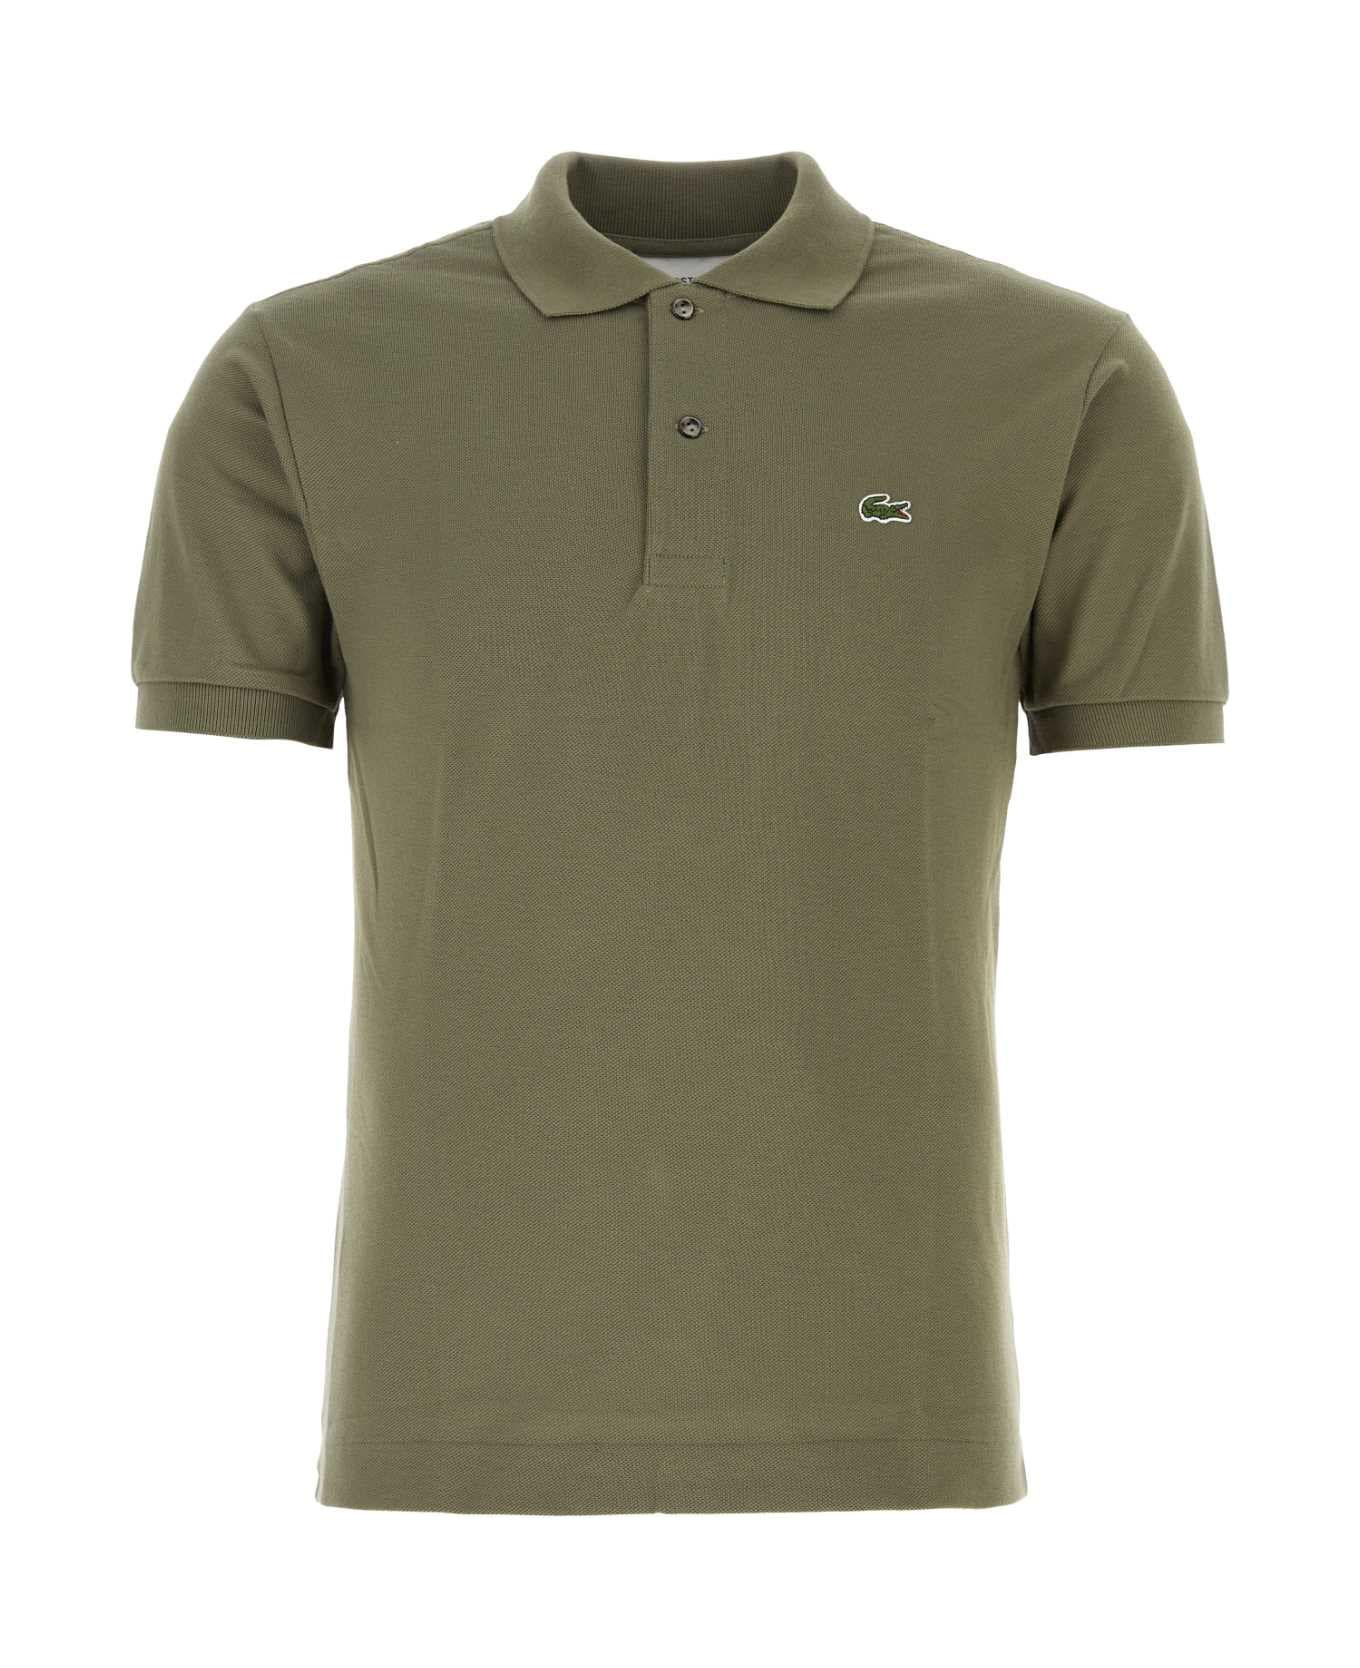 Lacoste Army Green Piquet Polo Shirt - 316 ポロシャツ